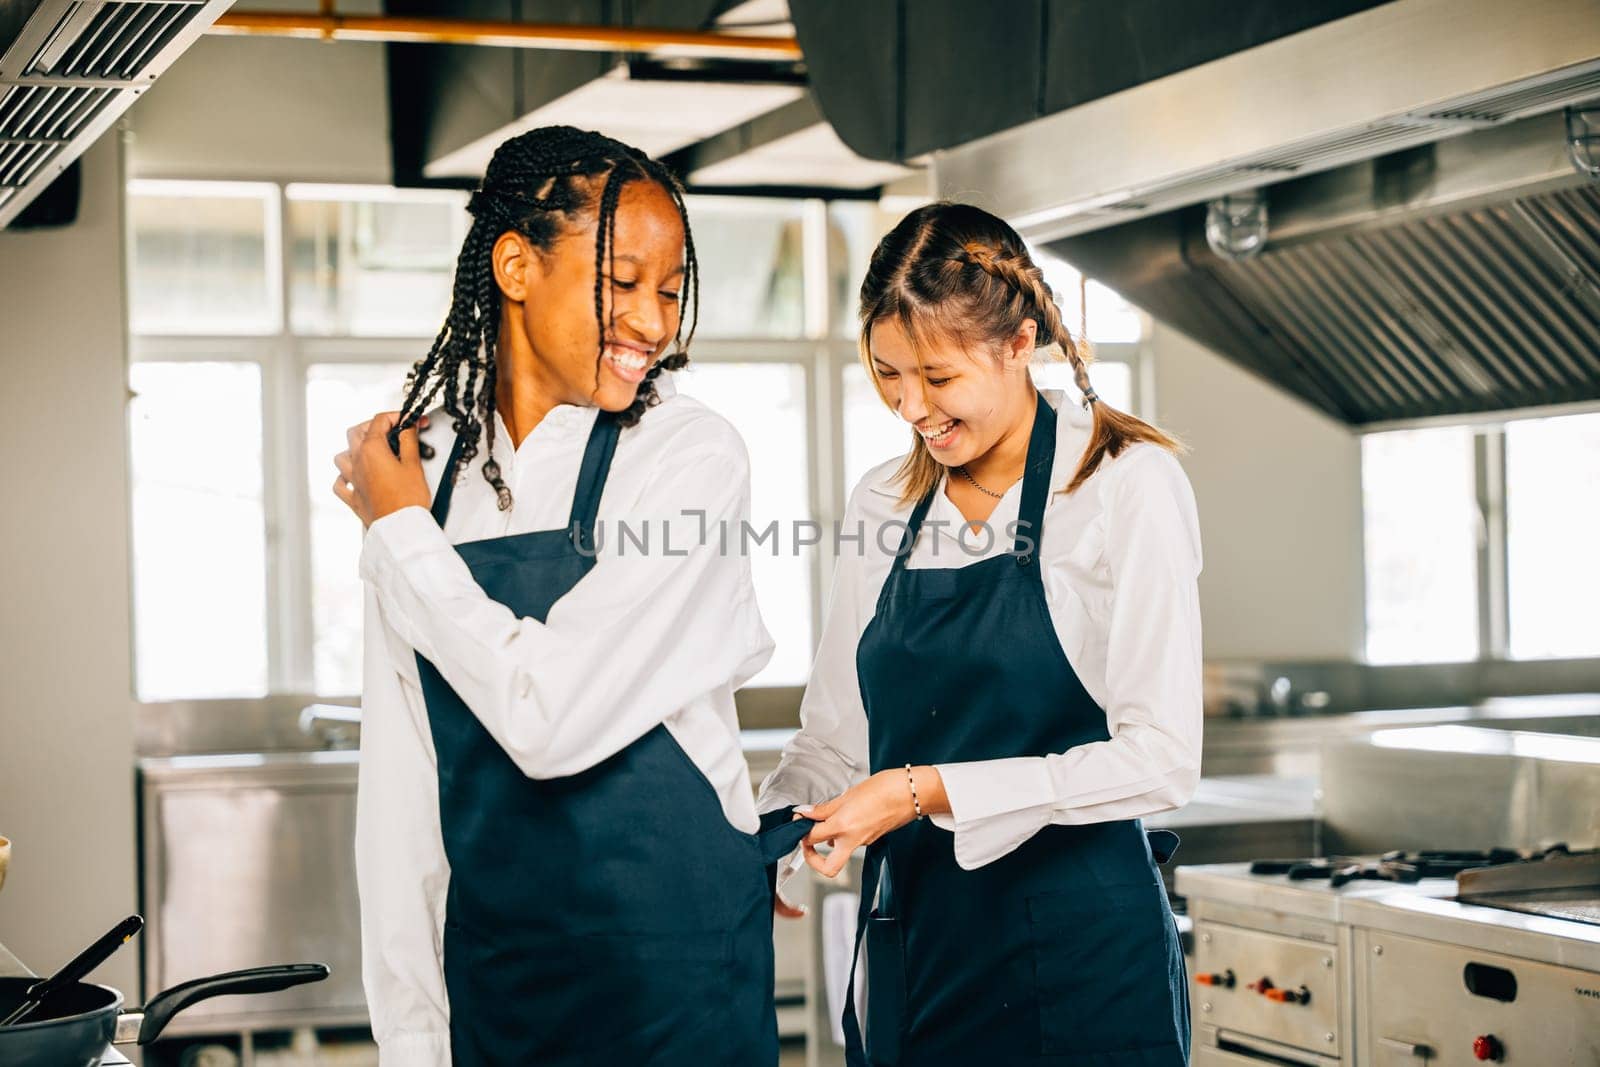 Female chef helps friend tie apron in a restaurant kitchen. Two adults in uniform prepare for food education and service in a professional environment. by Sorapop